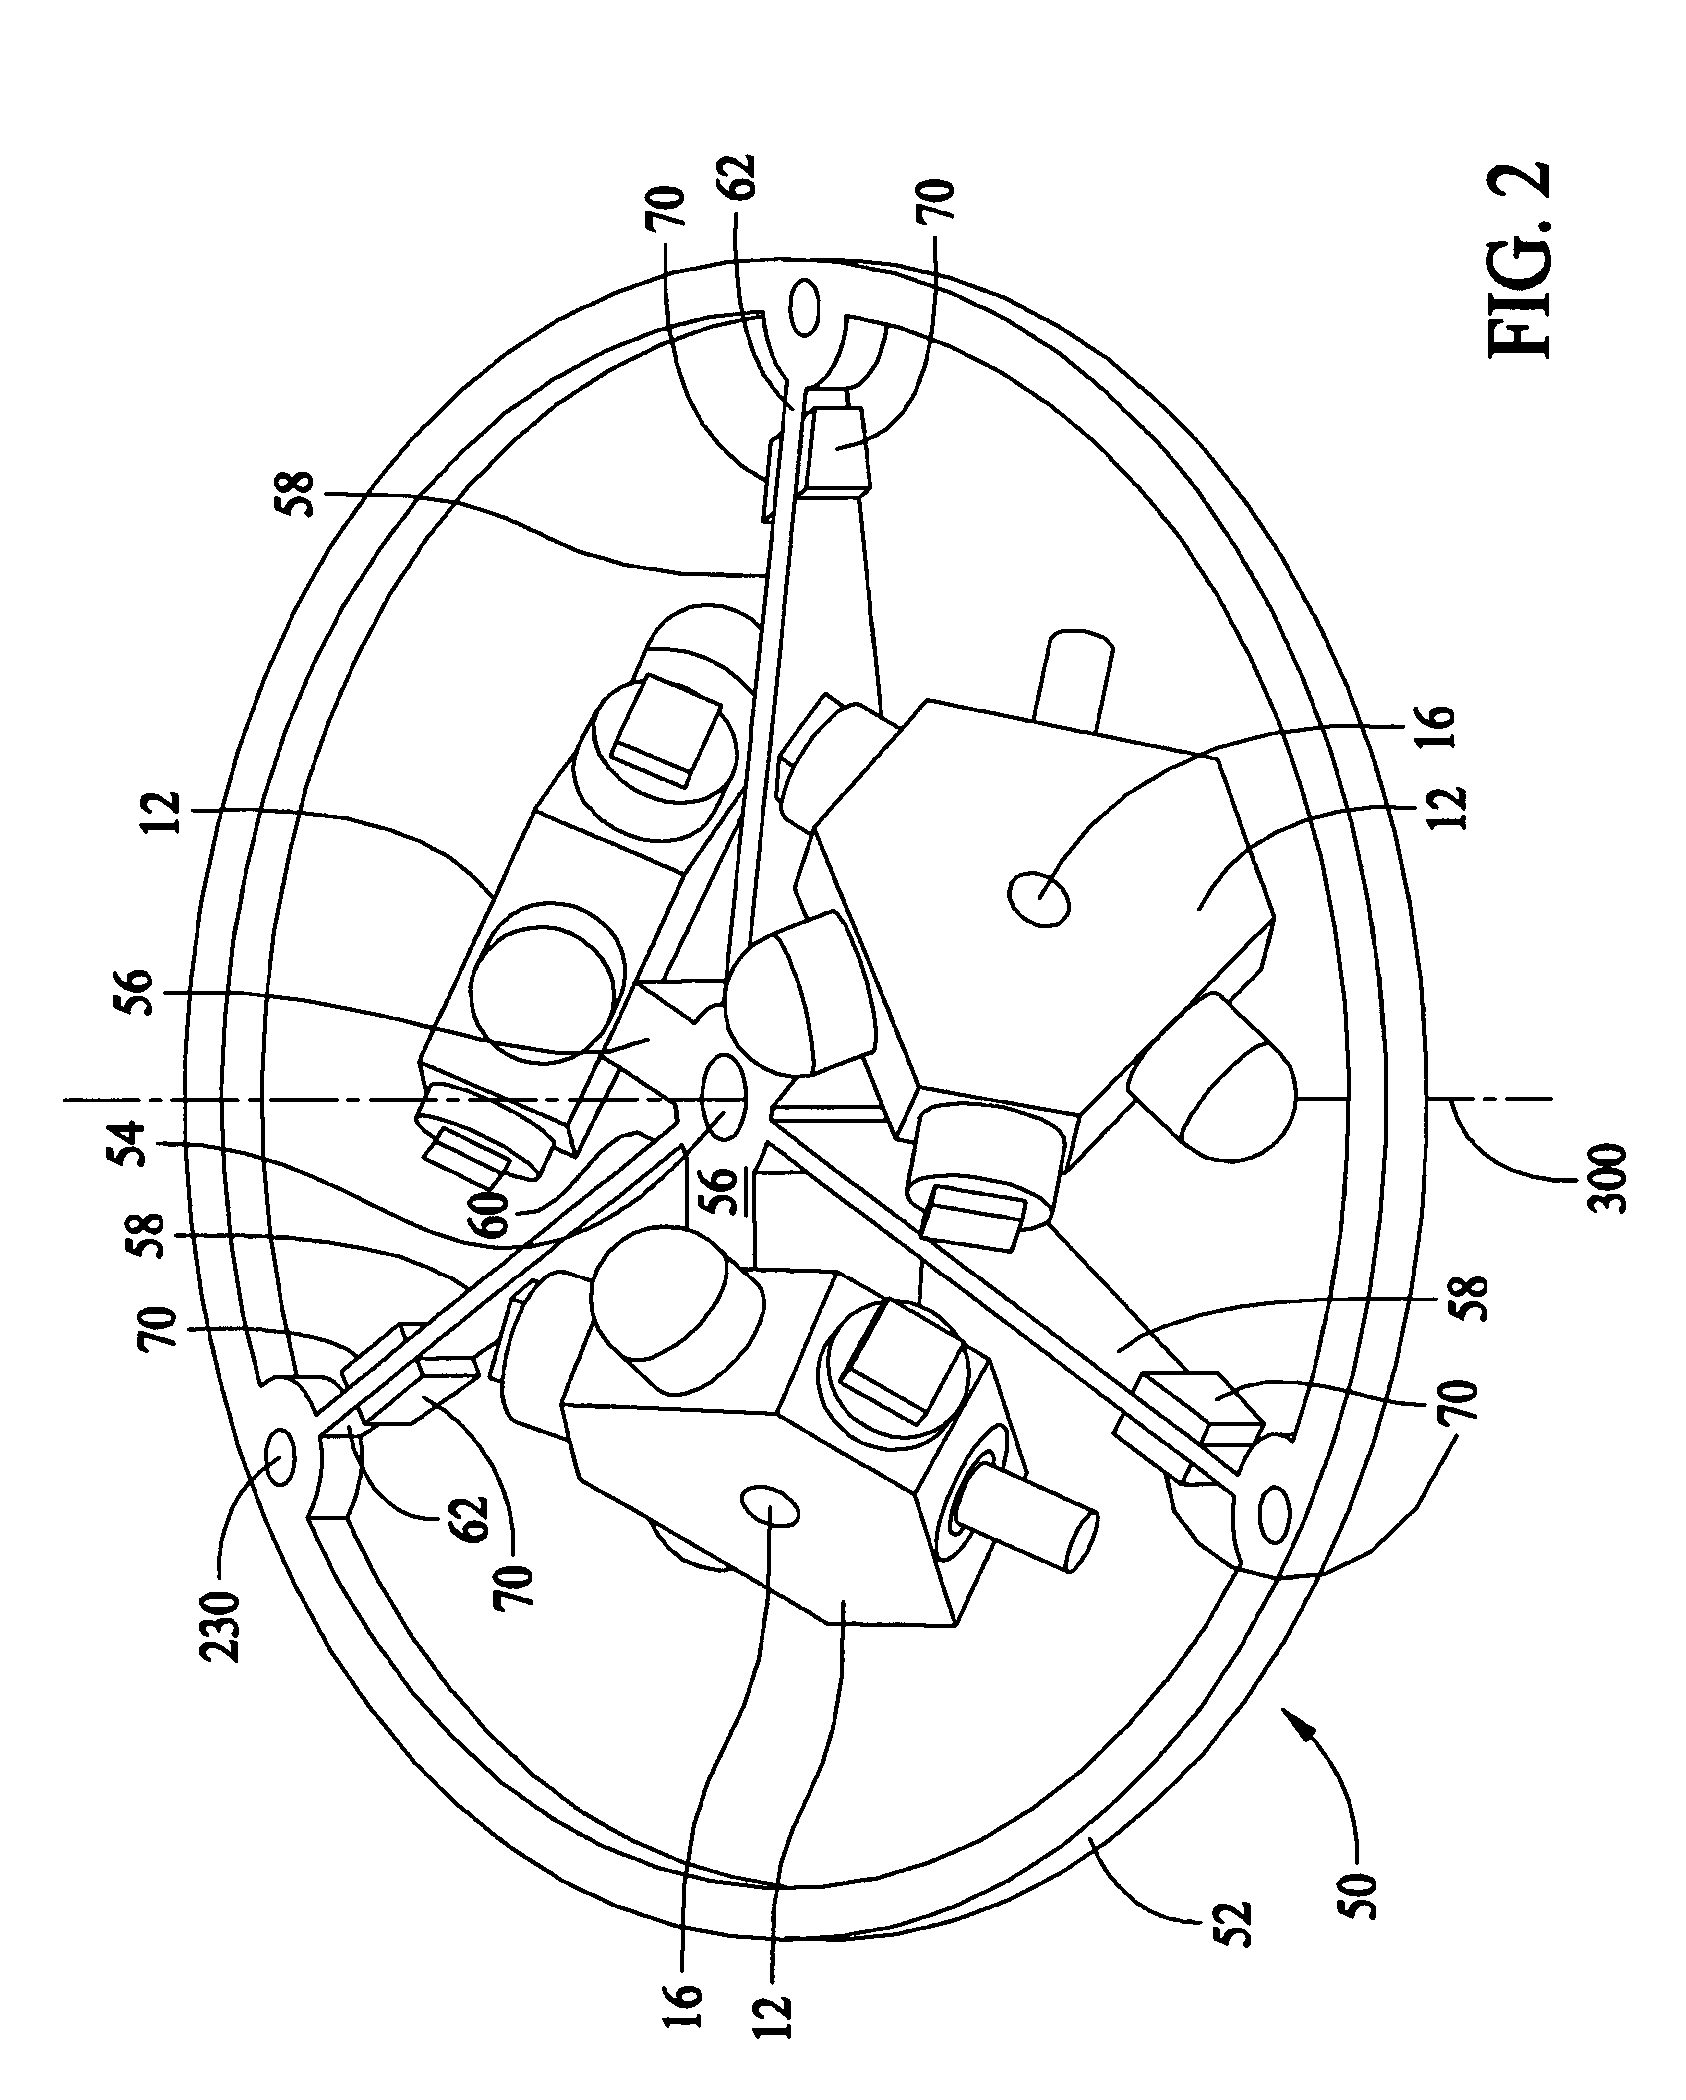 Dither motor having integrated drive and pickoff transducers